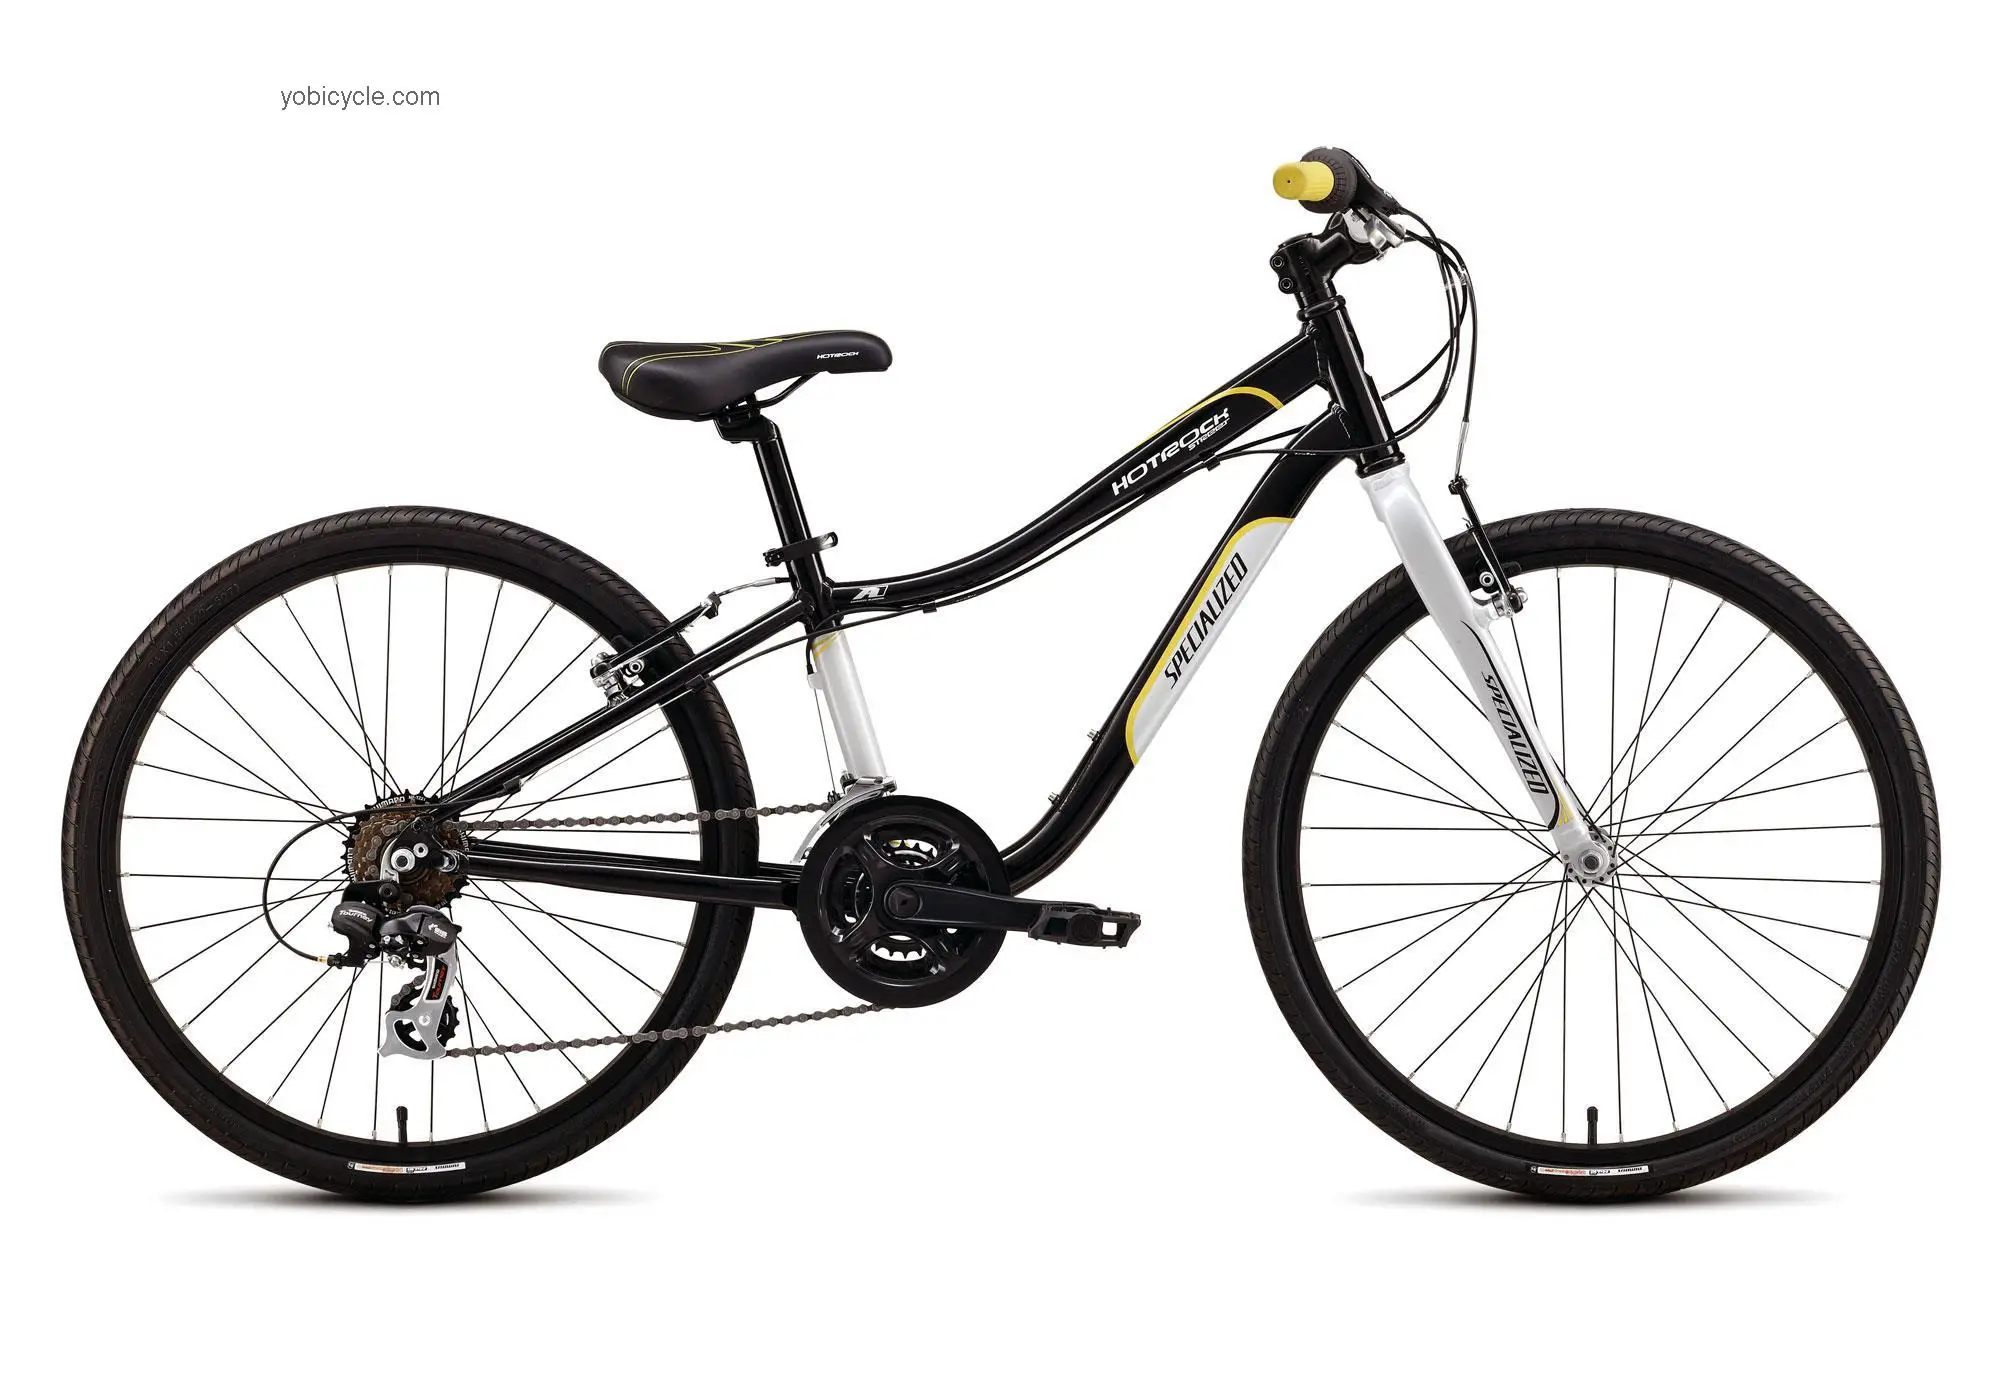 Specialized Hotrock 24 Street Boys competitors and comparison tool online specs and performance